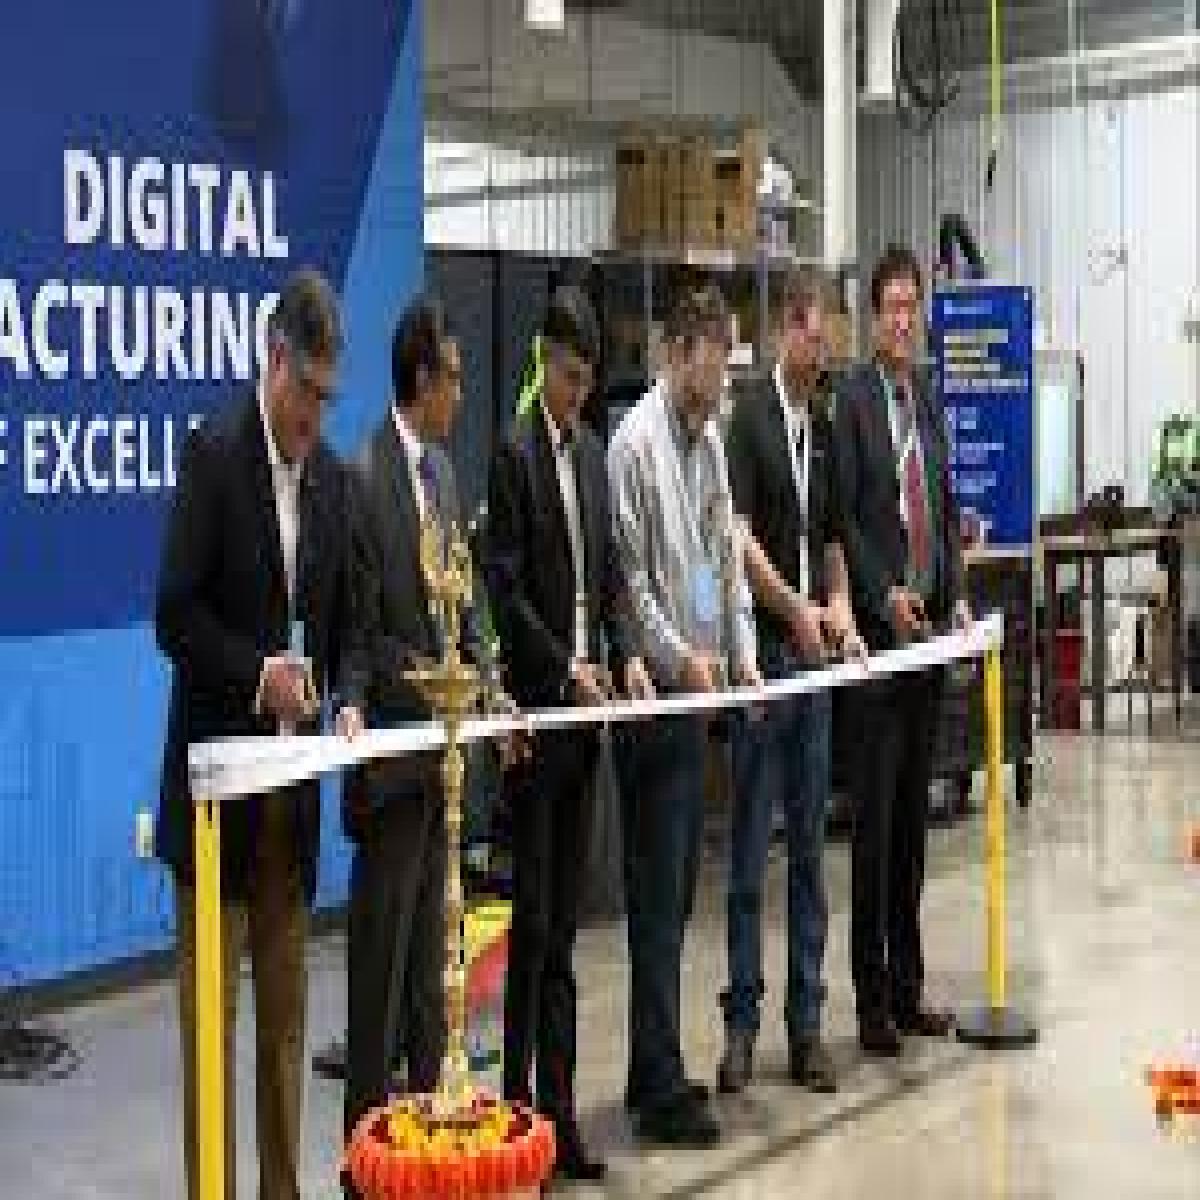 L&T Technology Services Inaugurates Digital Manufacturing and Electrification Prototype Centers in Peoria, USA